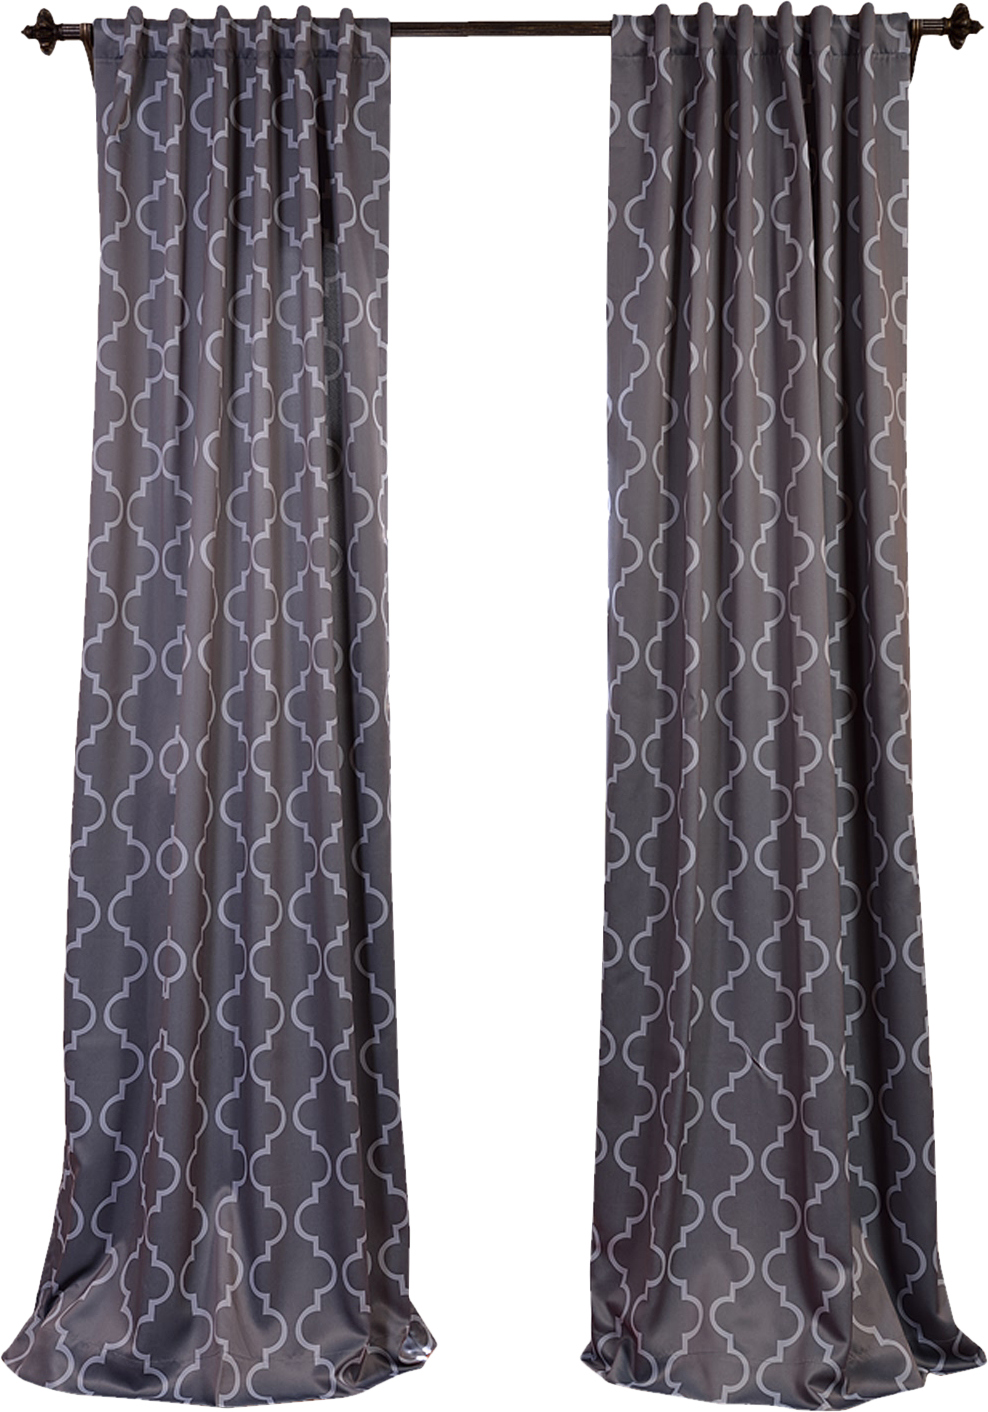 A Pair Of Grey Curtains